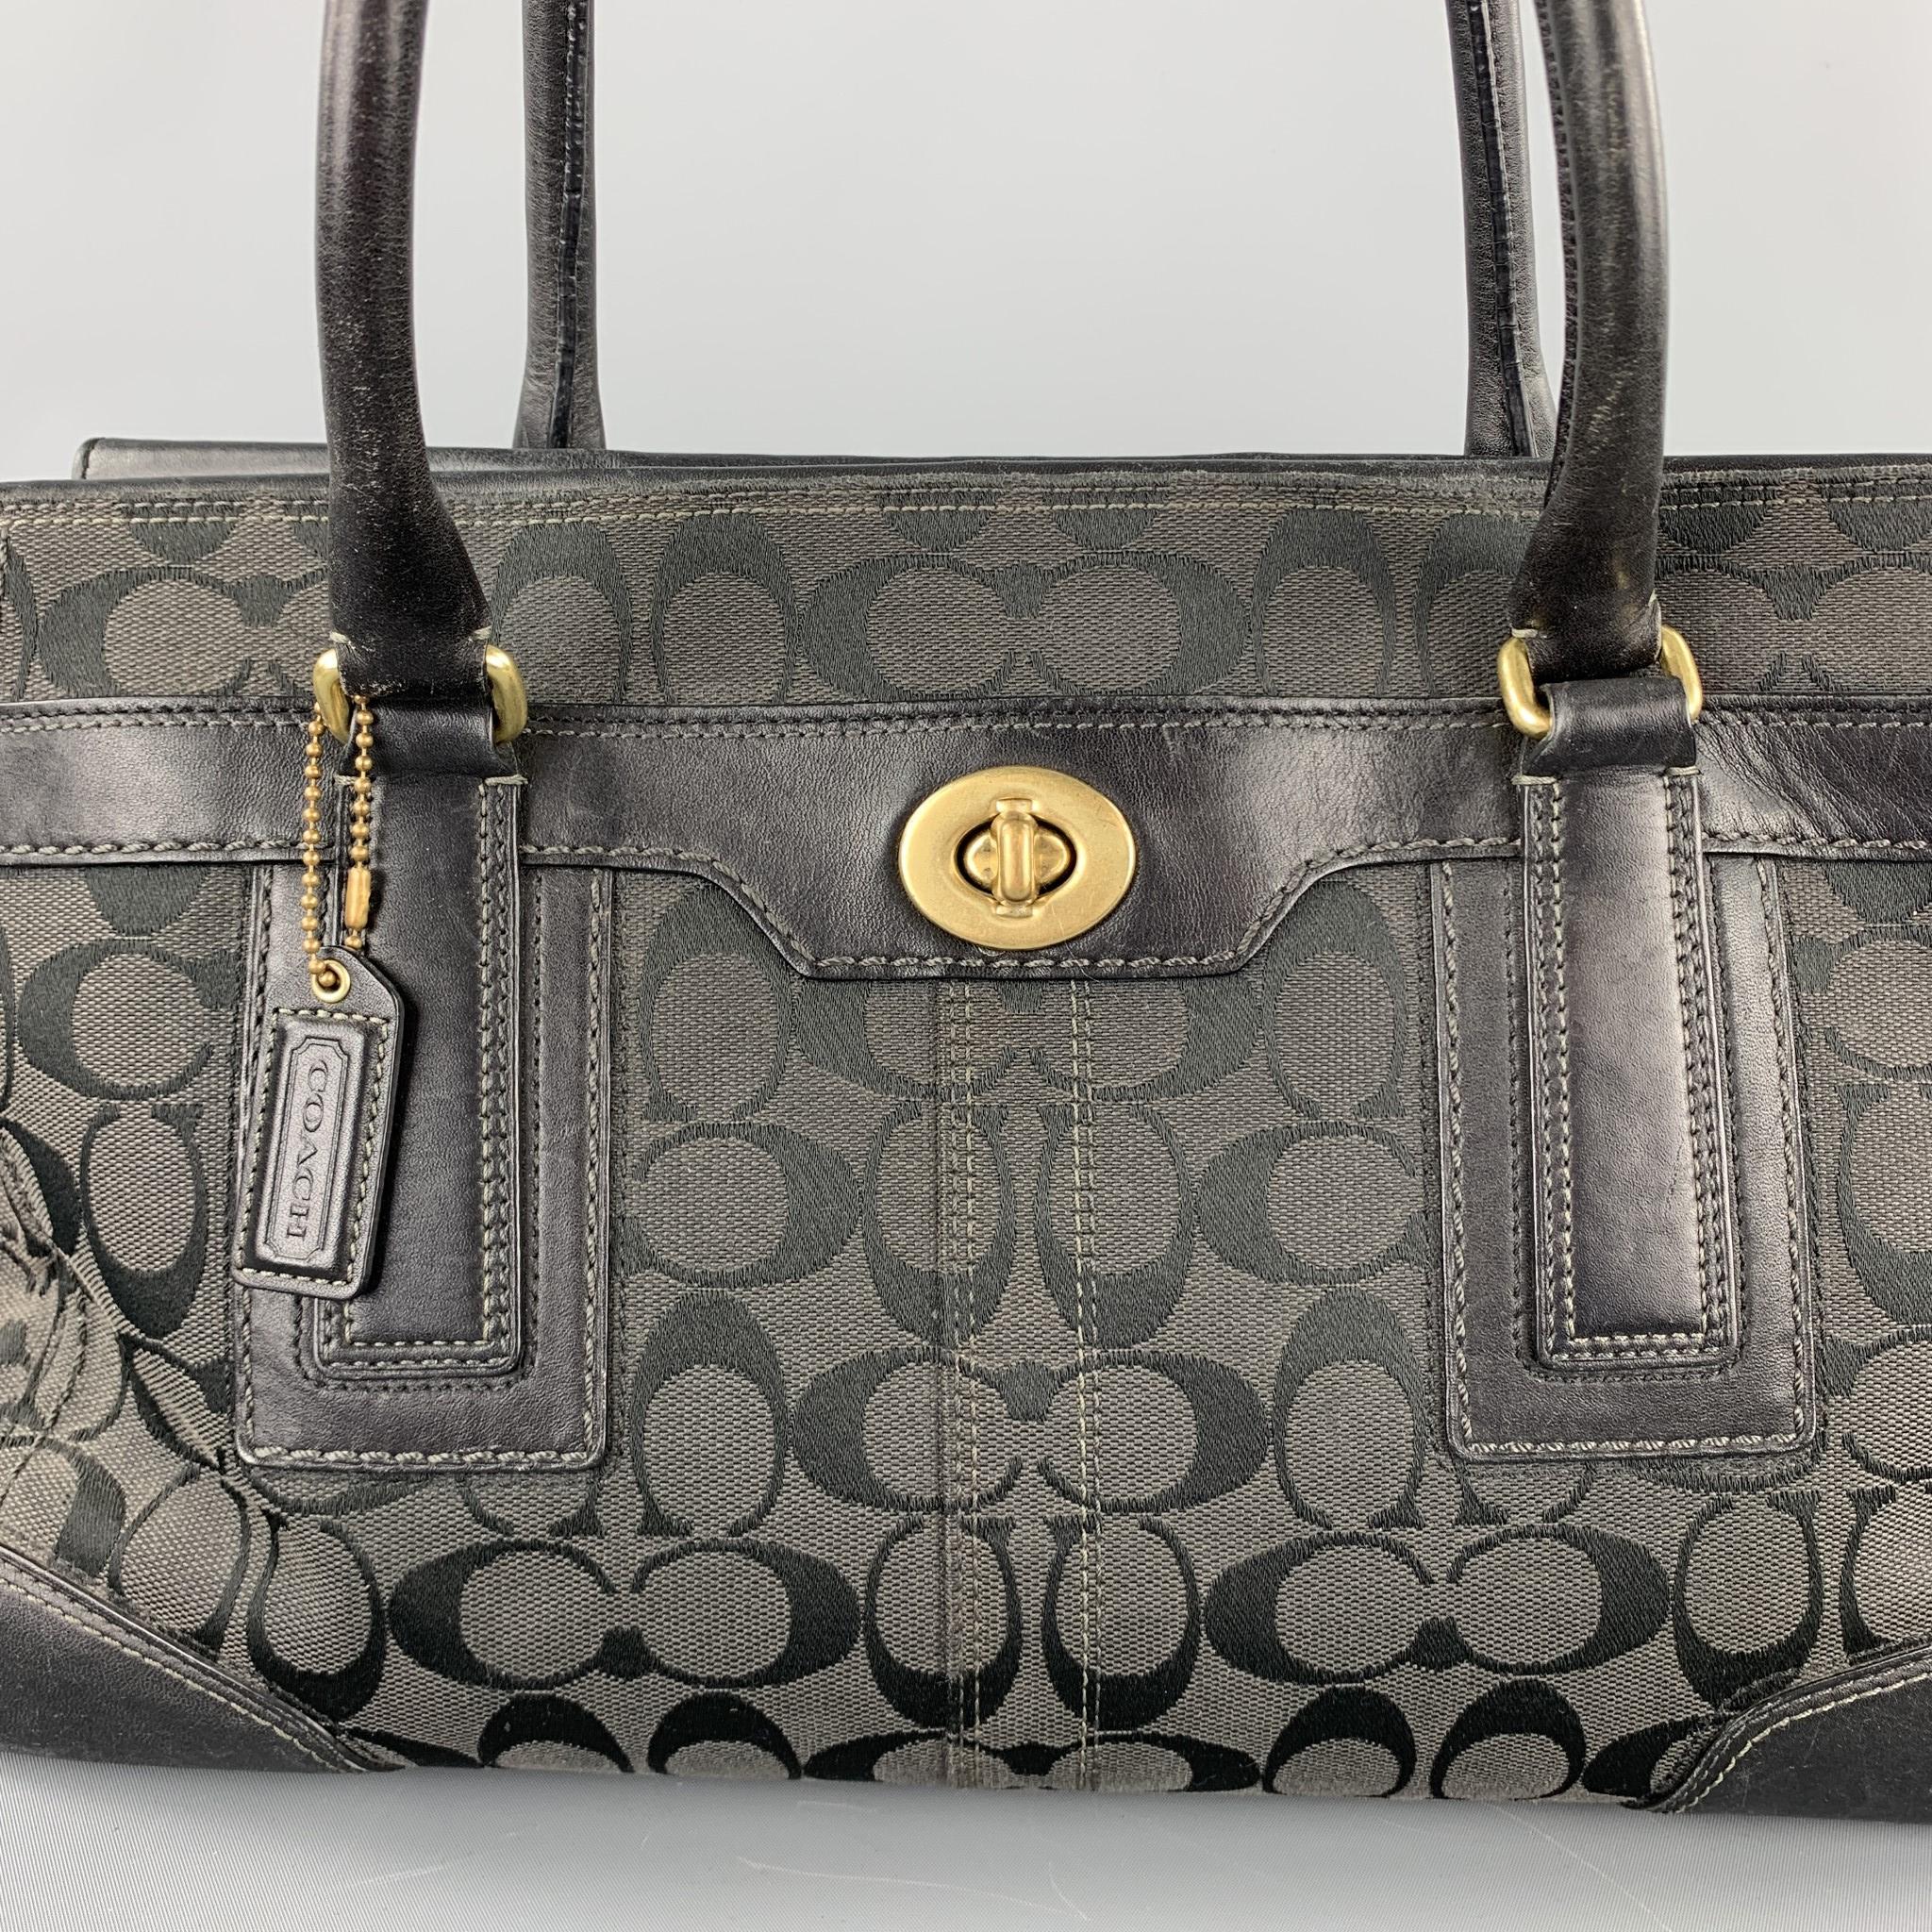 COACH handbag comes in a black monogram canvas with a leather trim featuring top handles, gold tone hardware, one inner pocket, and a zip up closure. Includes matching wallet.

Good Pre-Owned Condition.

Measurements:

Length: 14 in.
Width: 5 in.